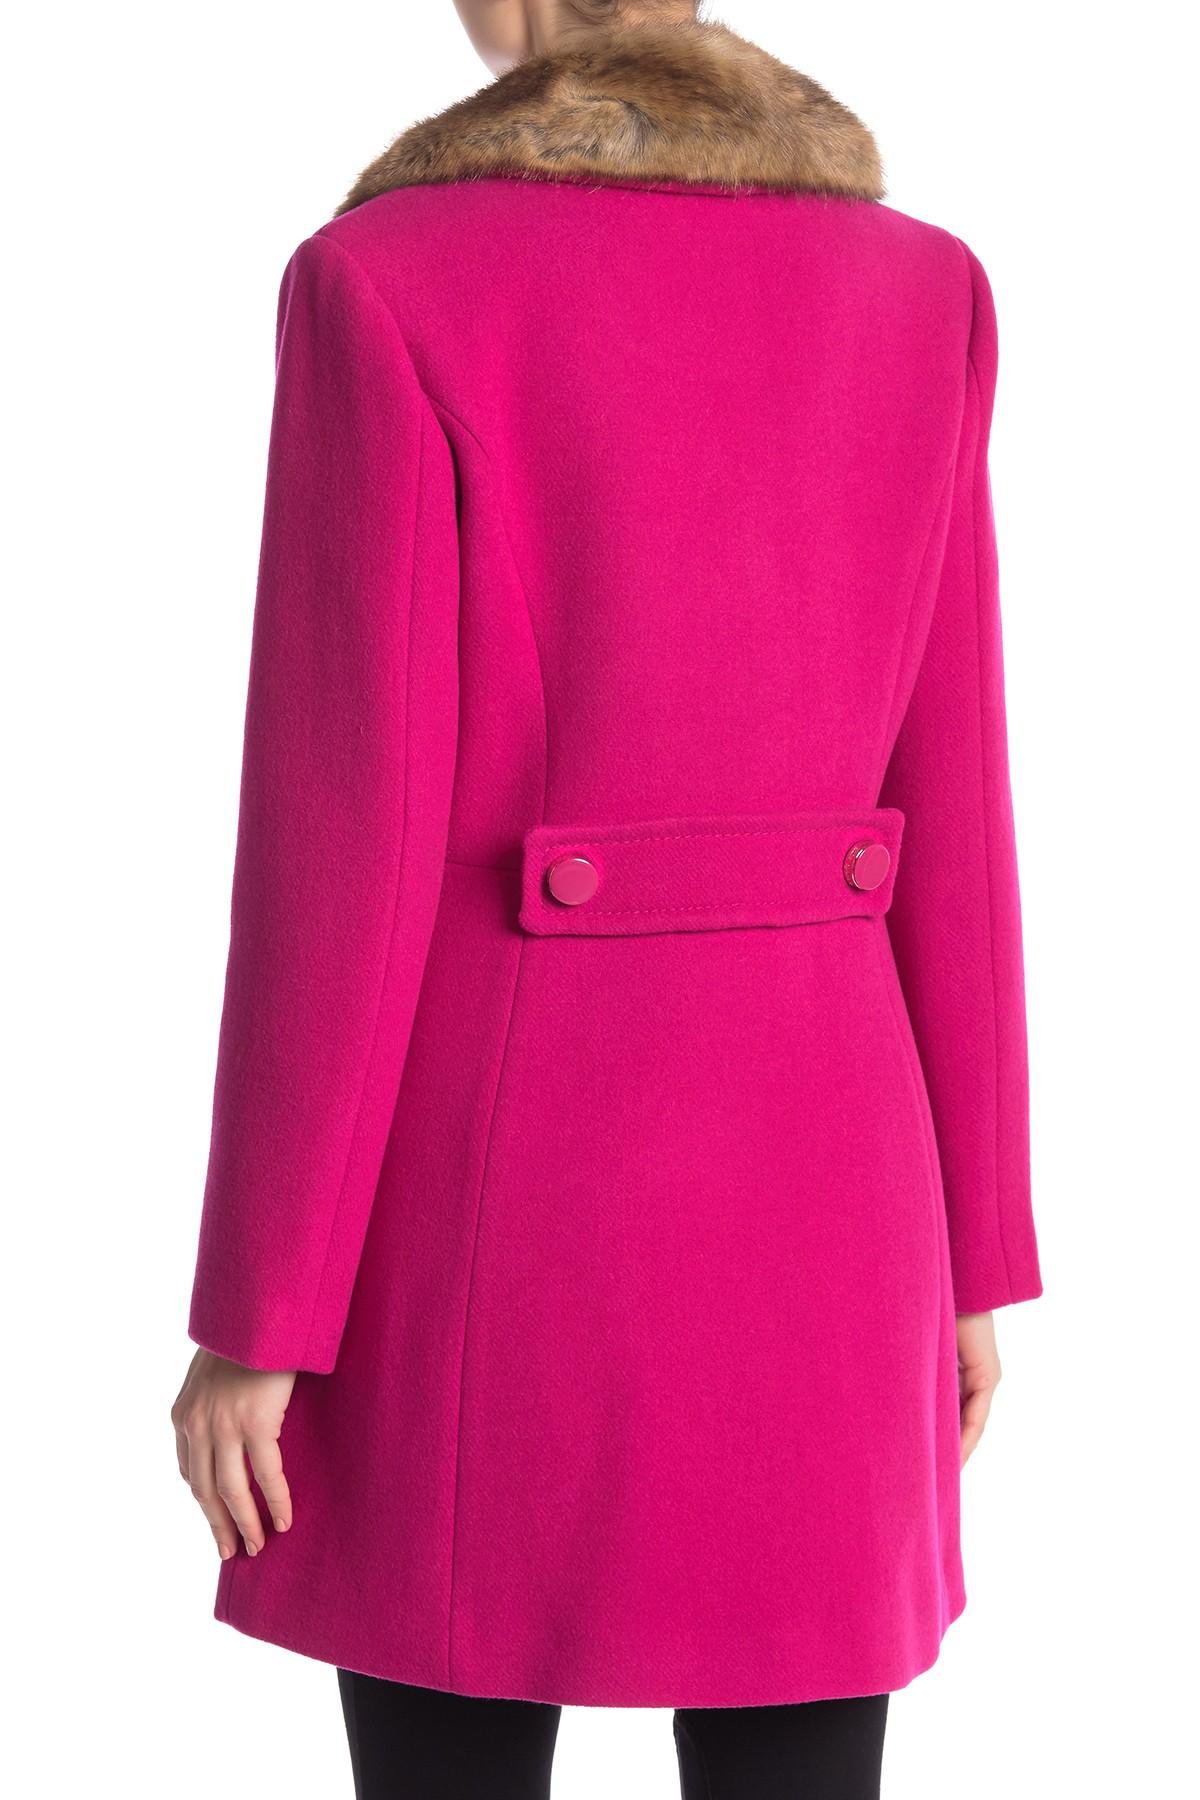 Kate Spade Removable Faux Fur Collar Wool Blend Coat in Bright rs (Pink ...